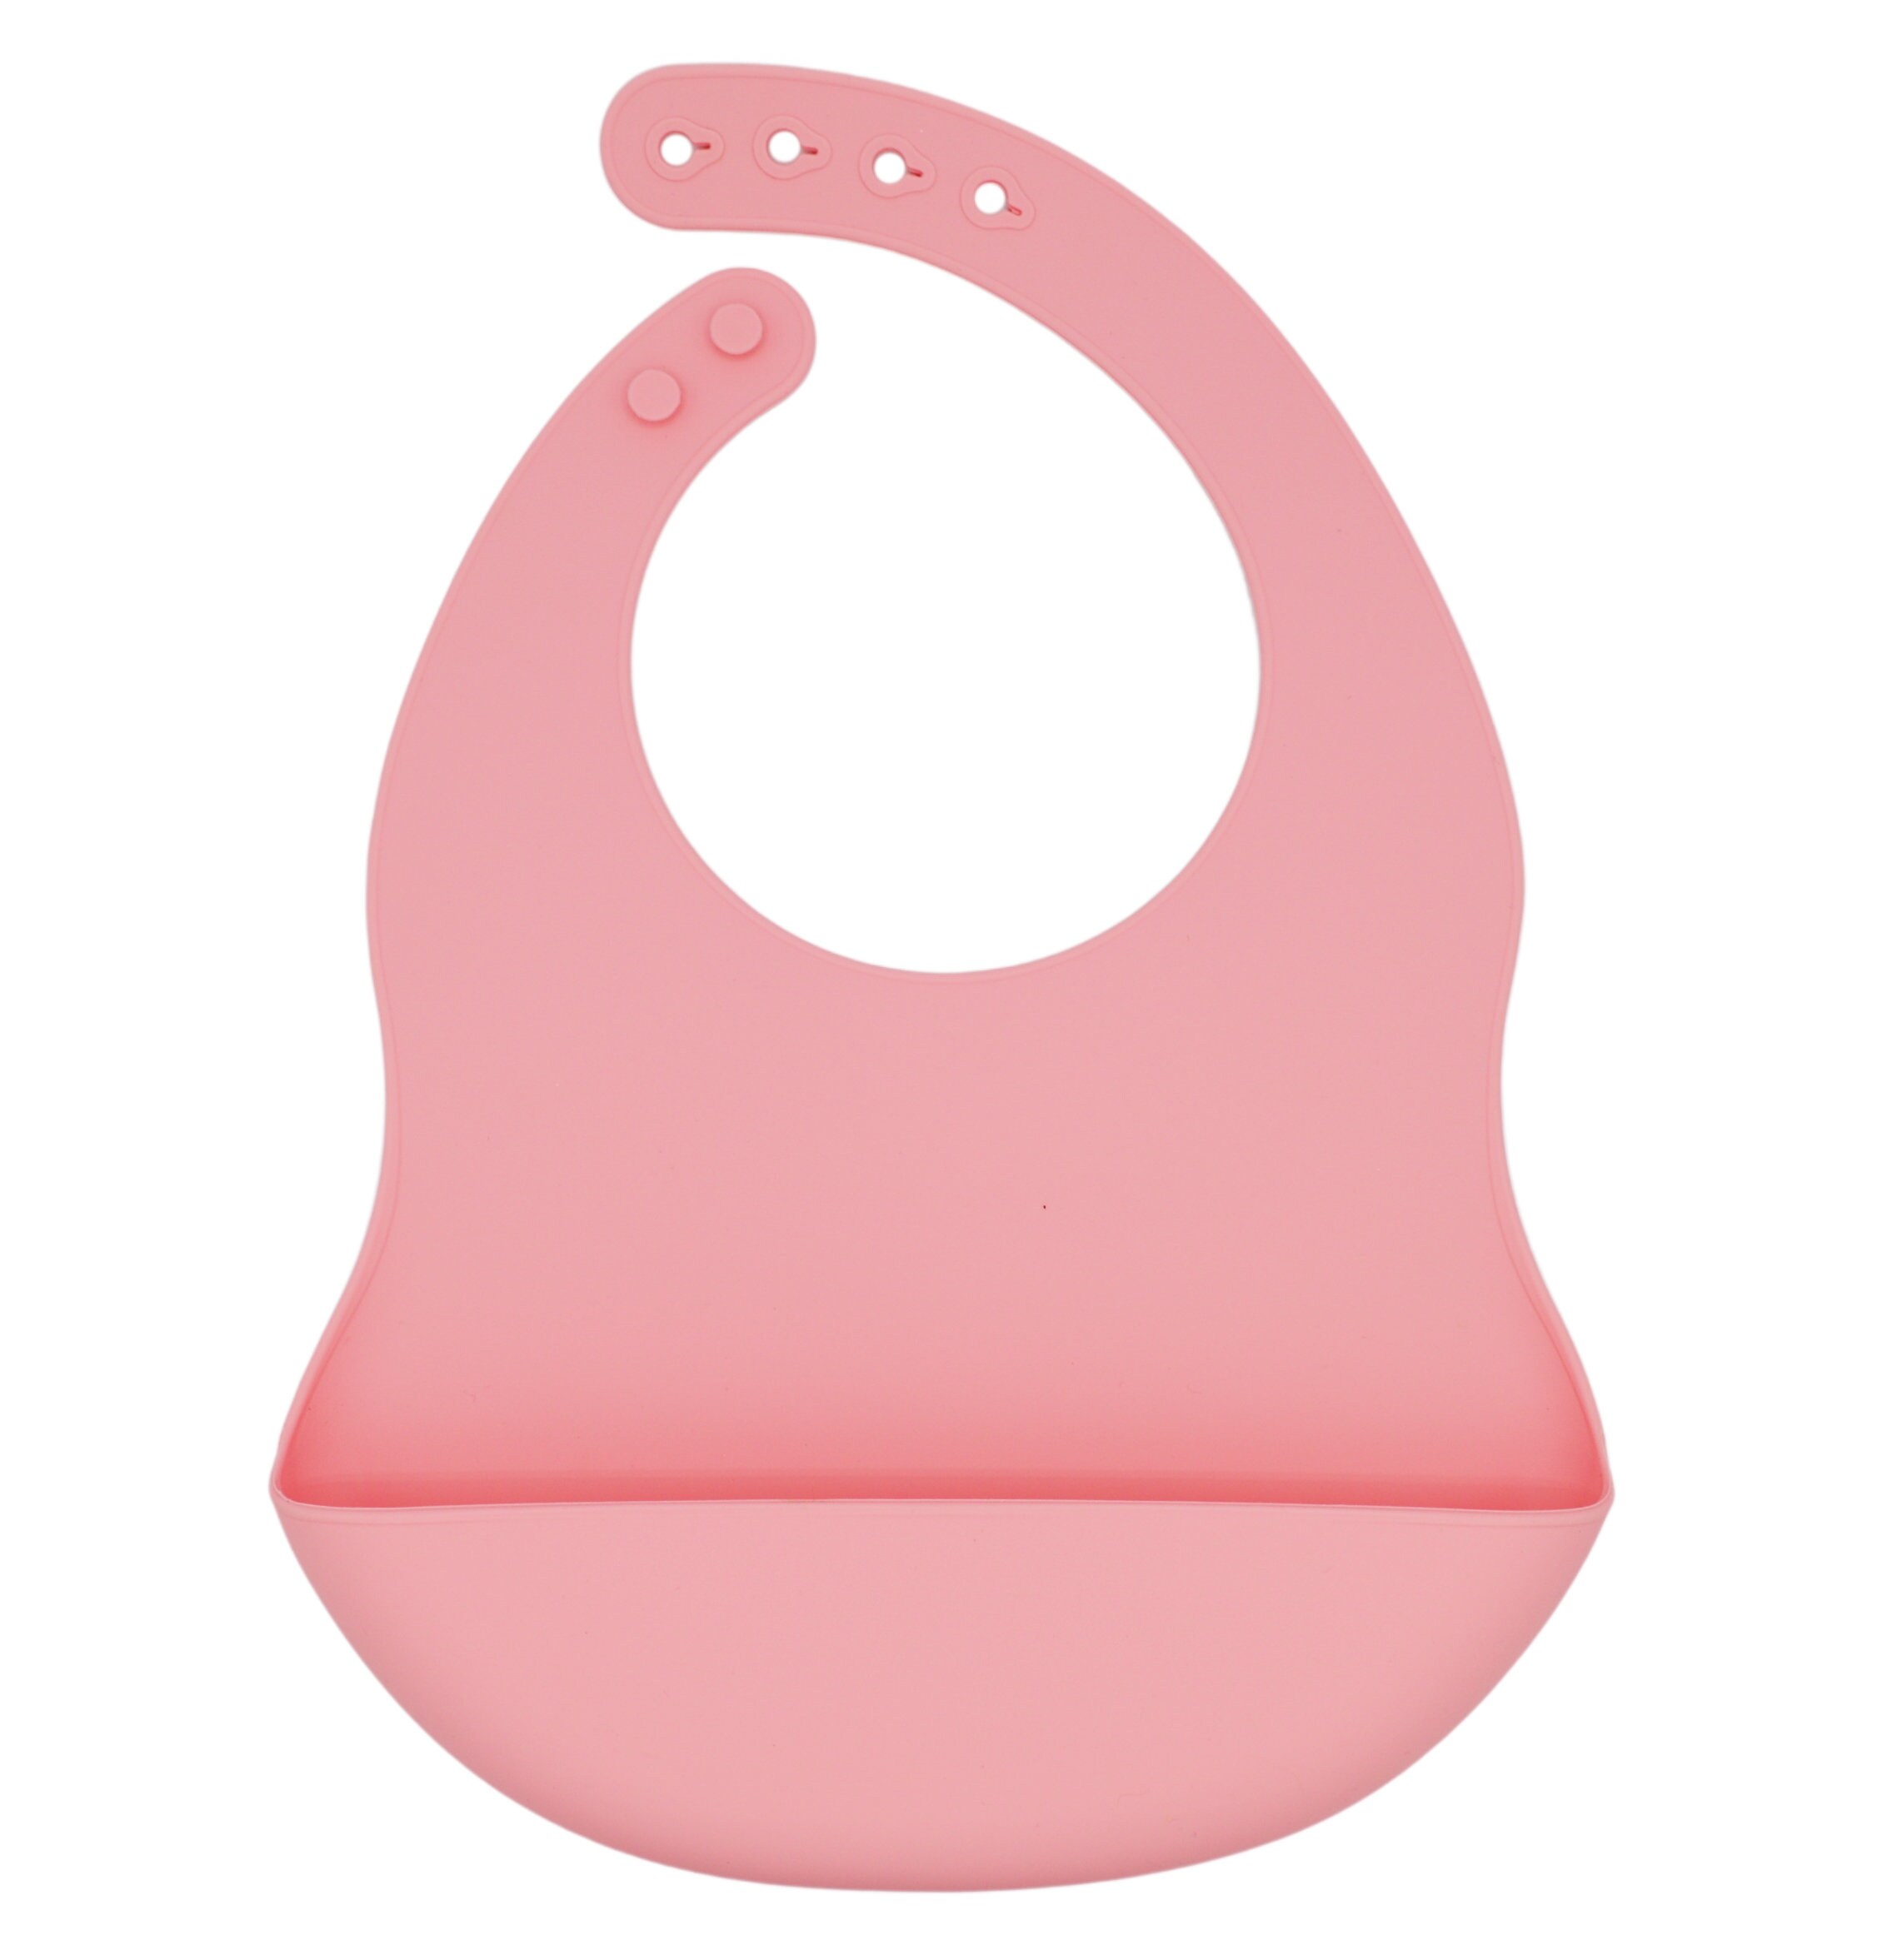 Refresh-A-Baby Feeding Essentials Kit for Feeding on The go Includes:  Universal Bottle Top Adaptor Resealable Container Silicone Bib Clear Travel  Bag